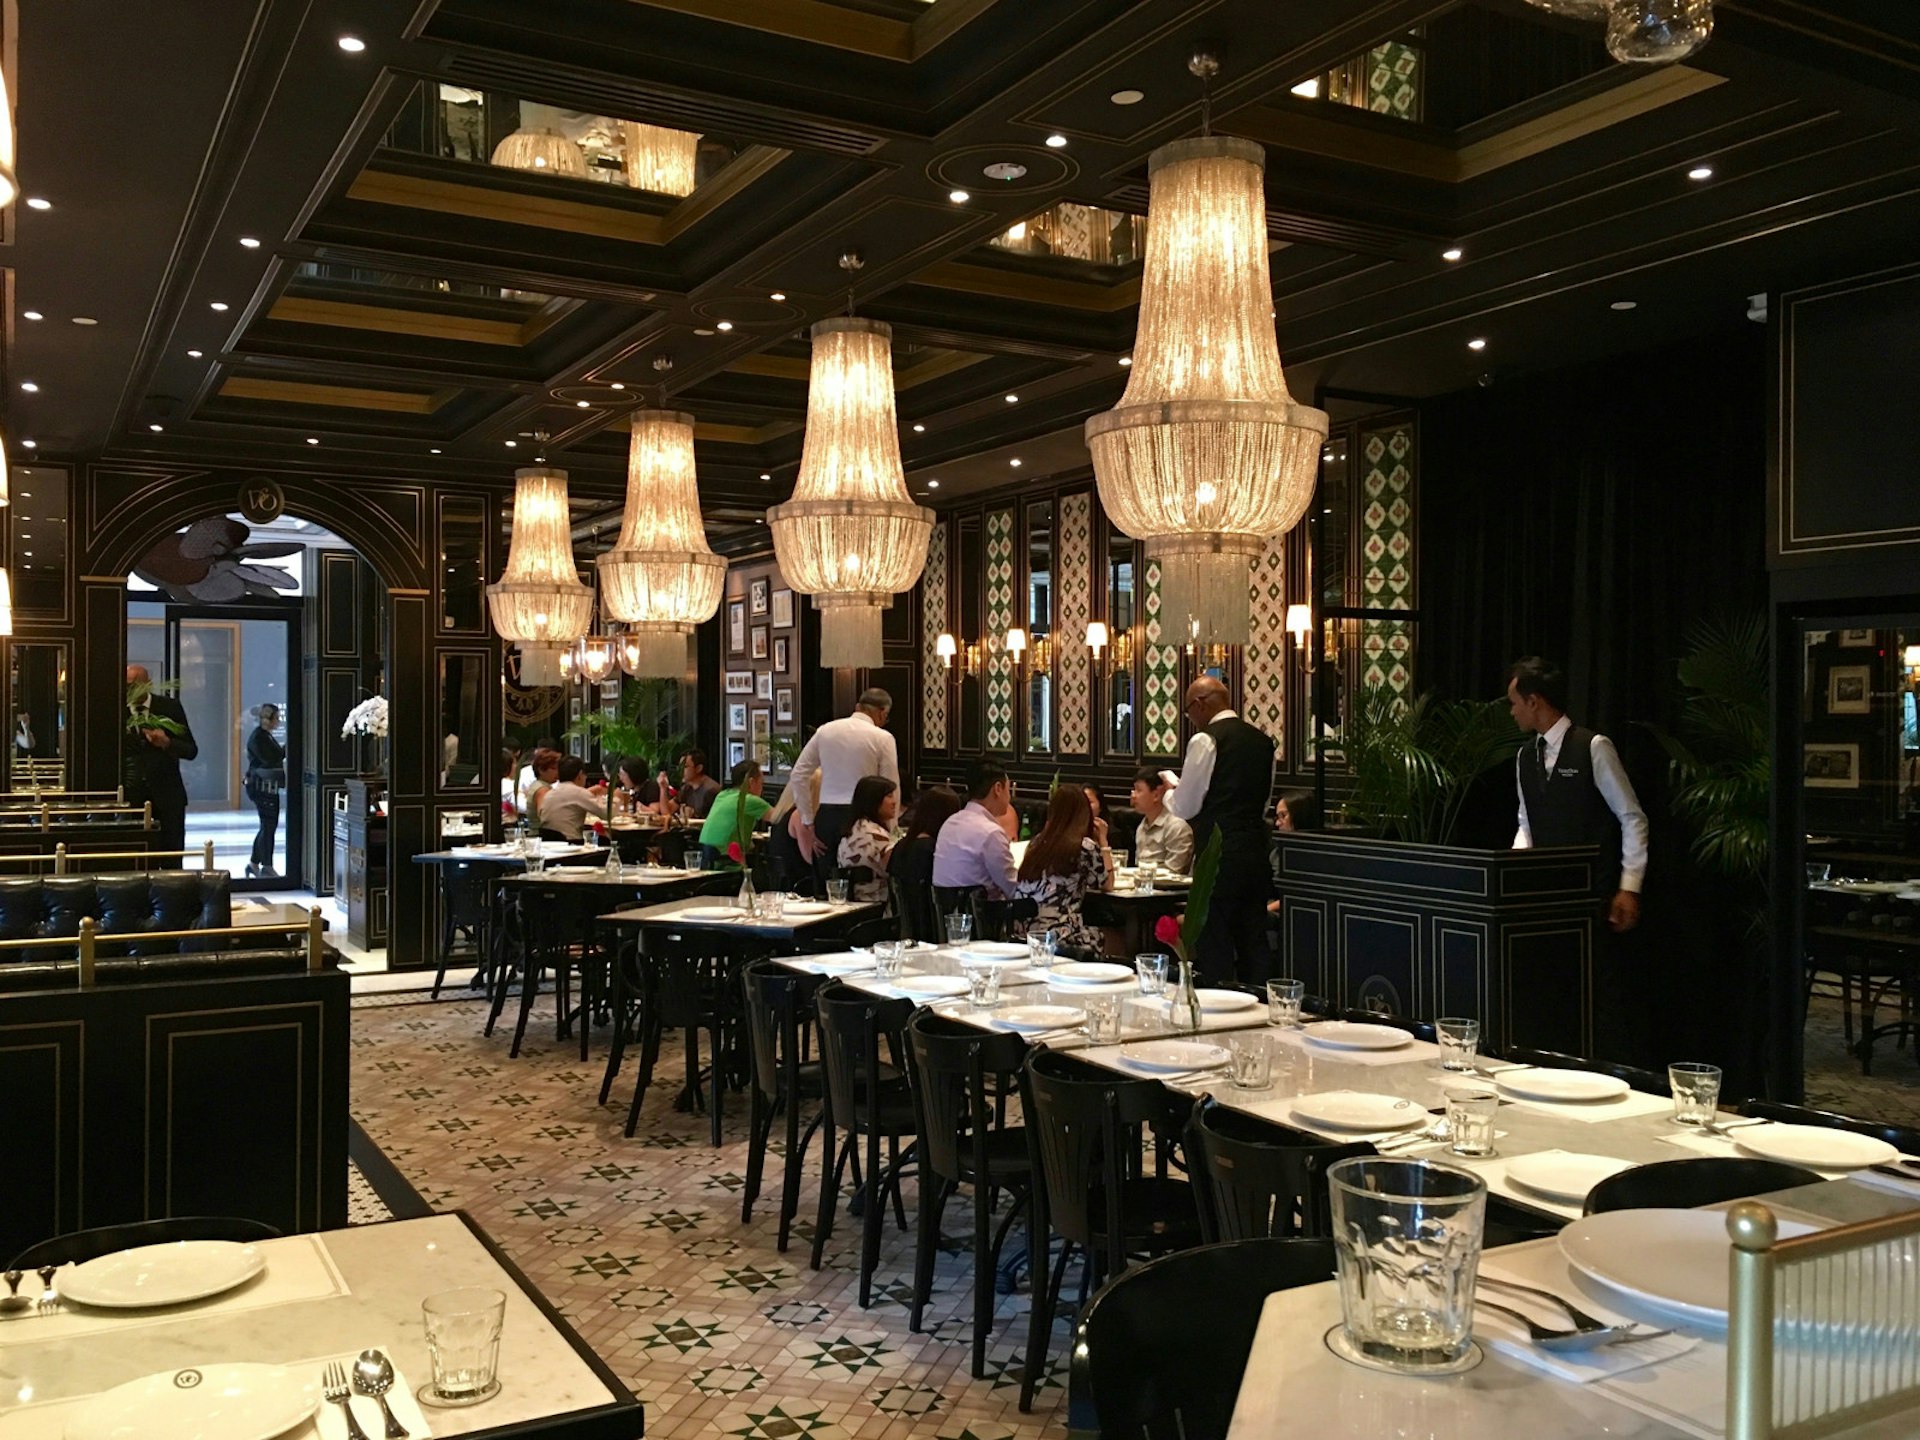 The dining room at National Kitchen by Violet Oon restaurant in Singapore